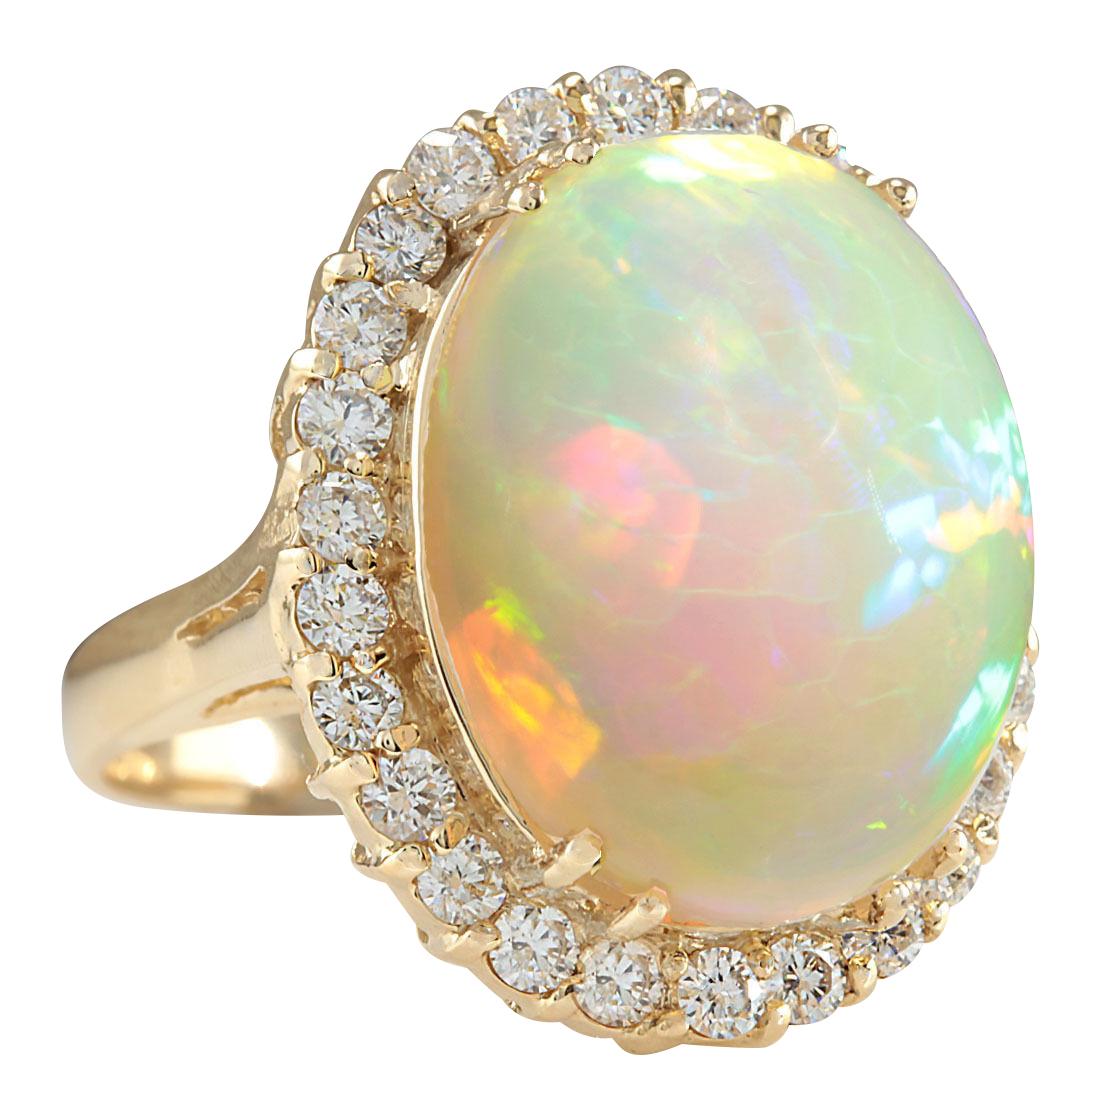 Introducing our magnificent 15.88 Carat Opal 14 Karat Yellow Gold Diamond Ring, a stunning fusion of opulence and elegance. Crafted from authentic 14K Yellow Gold and stamped for assurance, this ring carries a total weight of 8.5 grams, ensuring